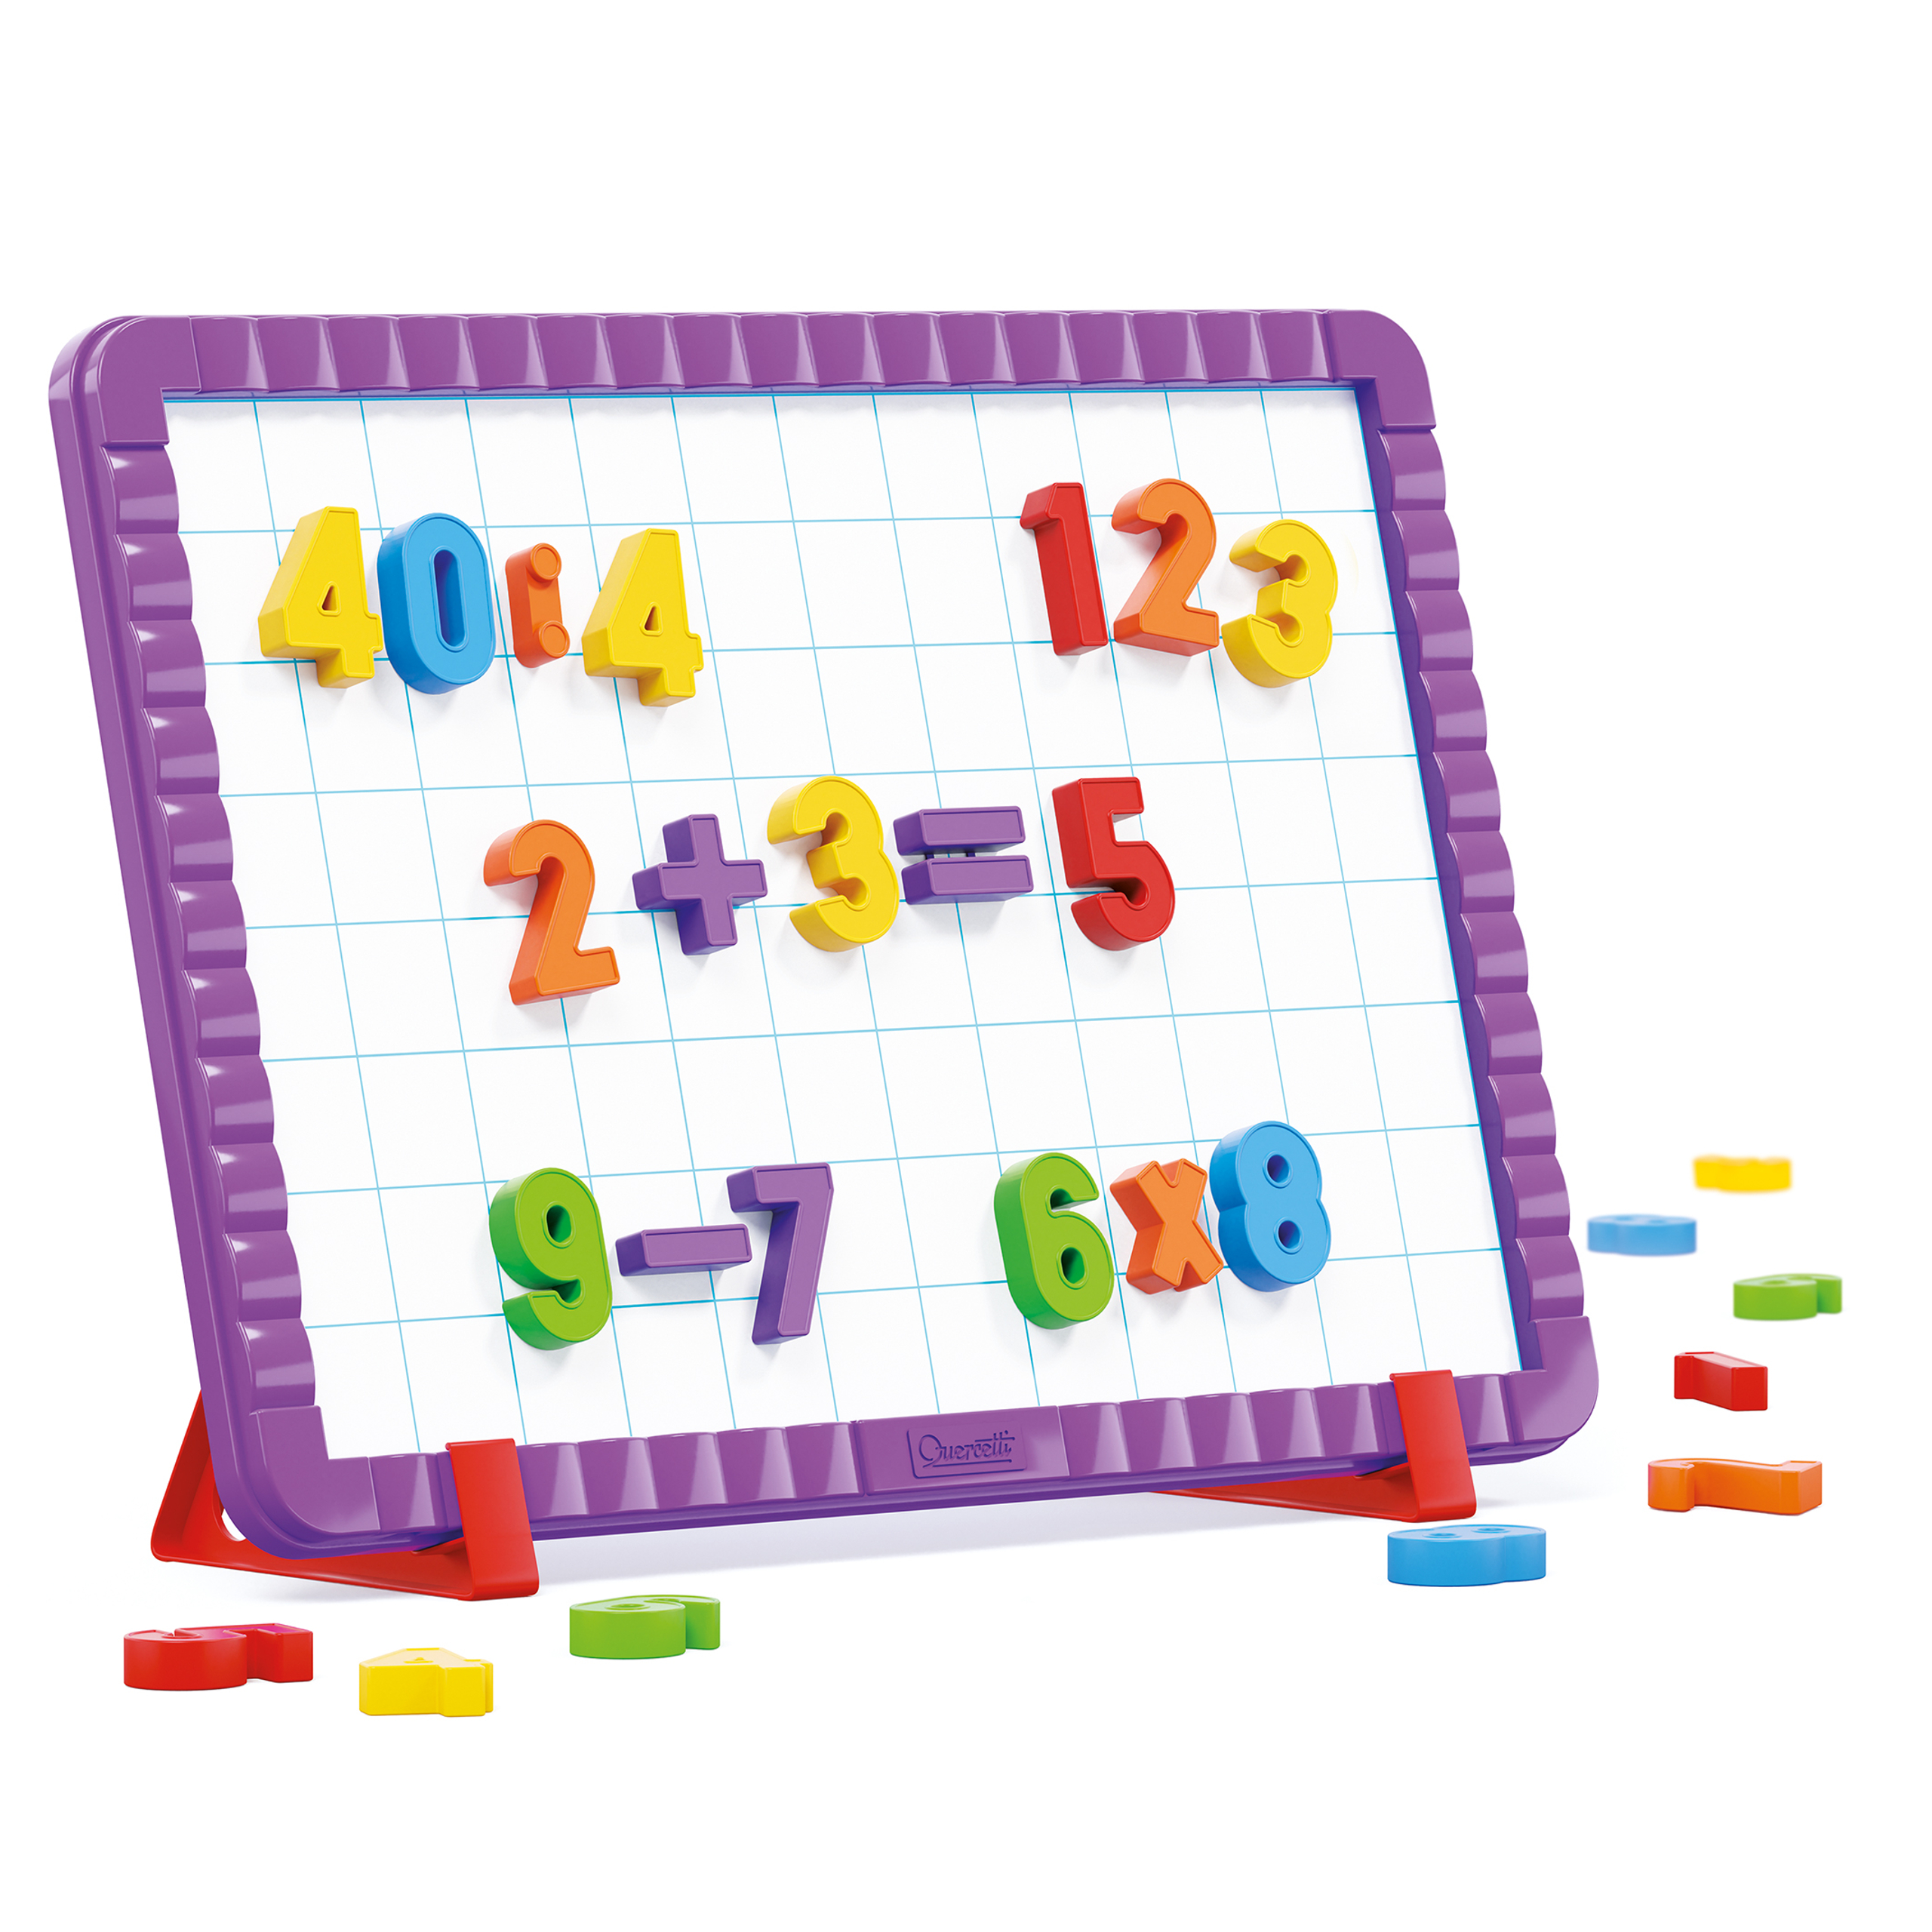 Letters & numbers quercetti magnetic board numbers